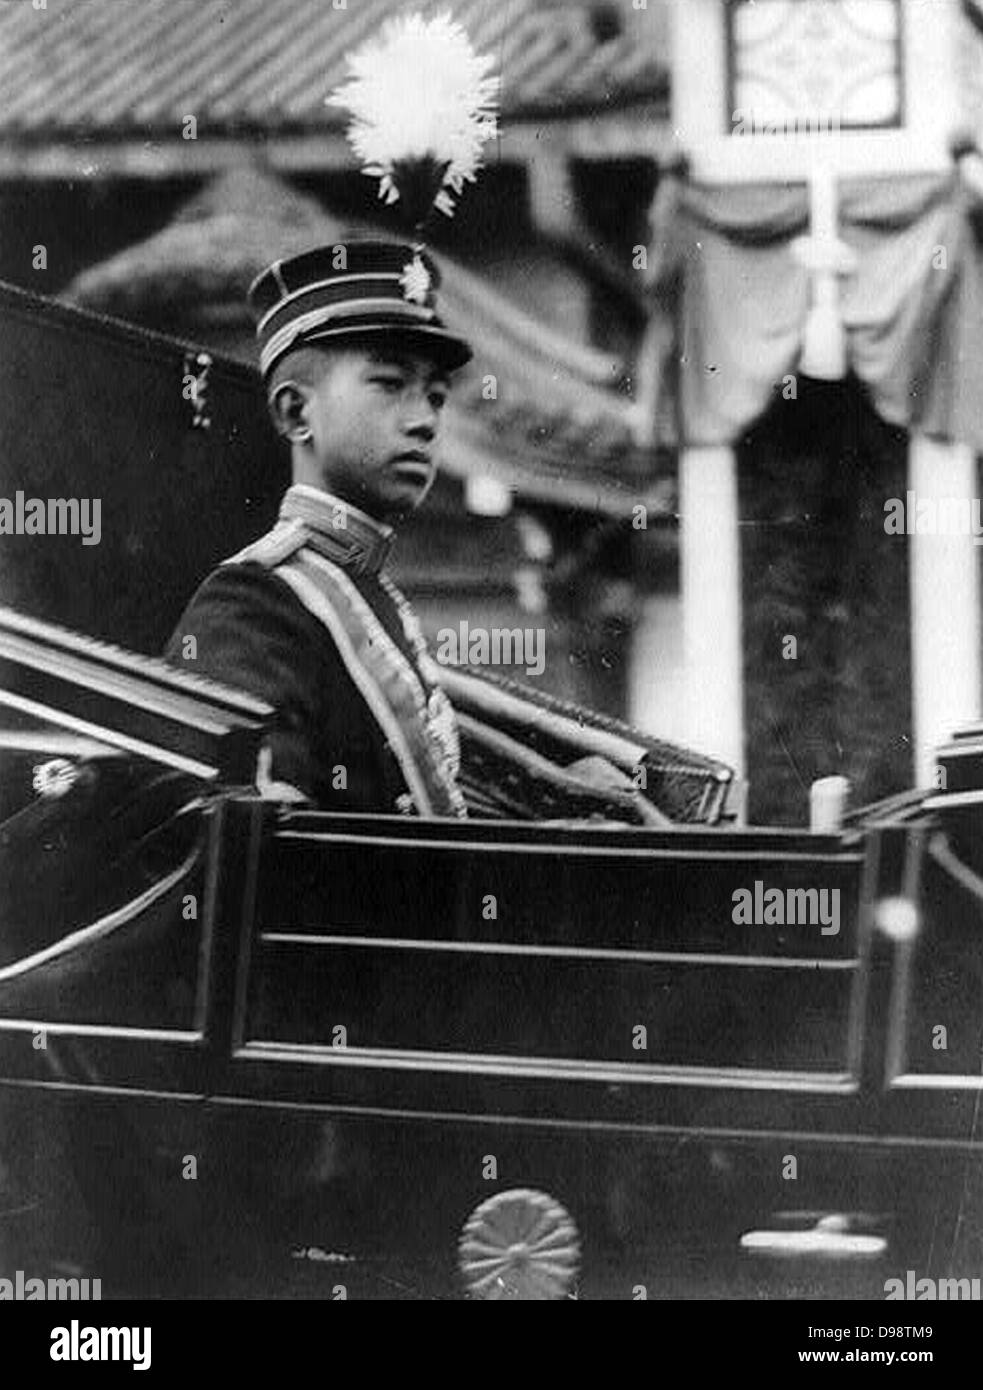 Hirohito, Emperor Showa (1901-1989), 124th Emperor of Japan from 1926. Hirohito in 1912 when on the death of his grandfather Emperor Meiji he became heir apparent. Head and shoulders view of him riding in a carriage. Stock Photo